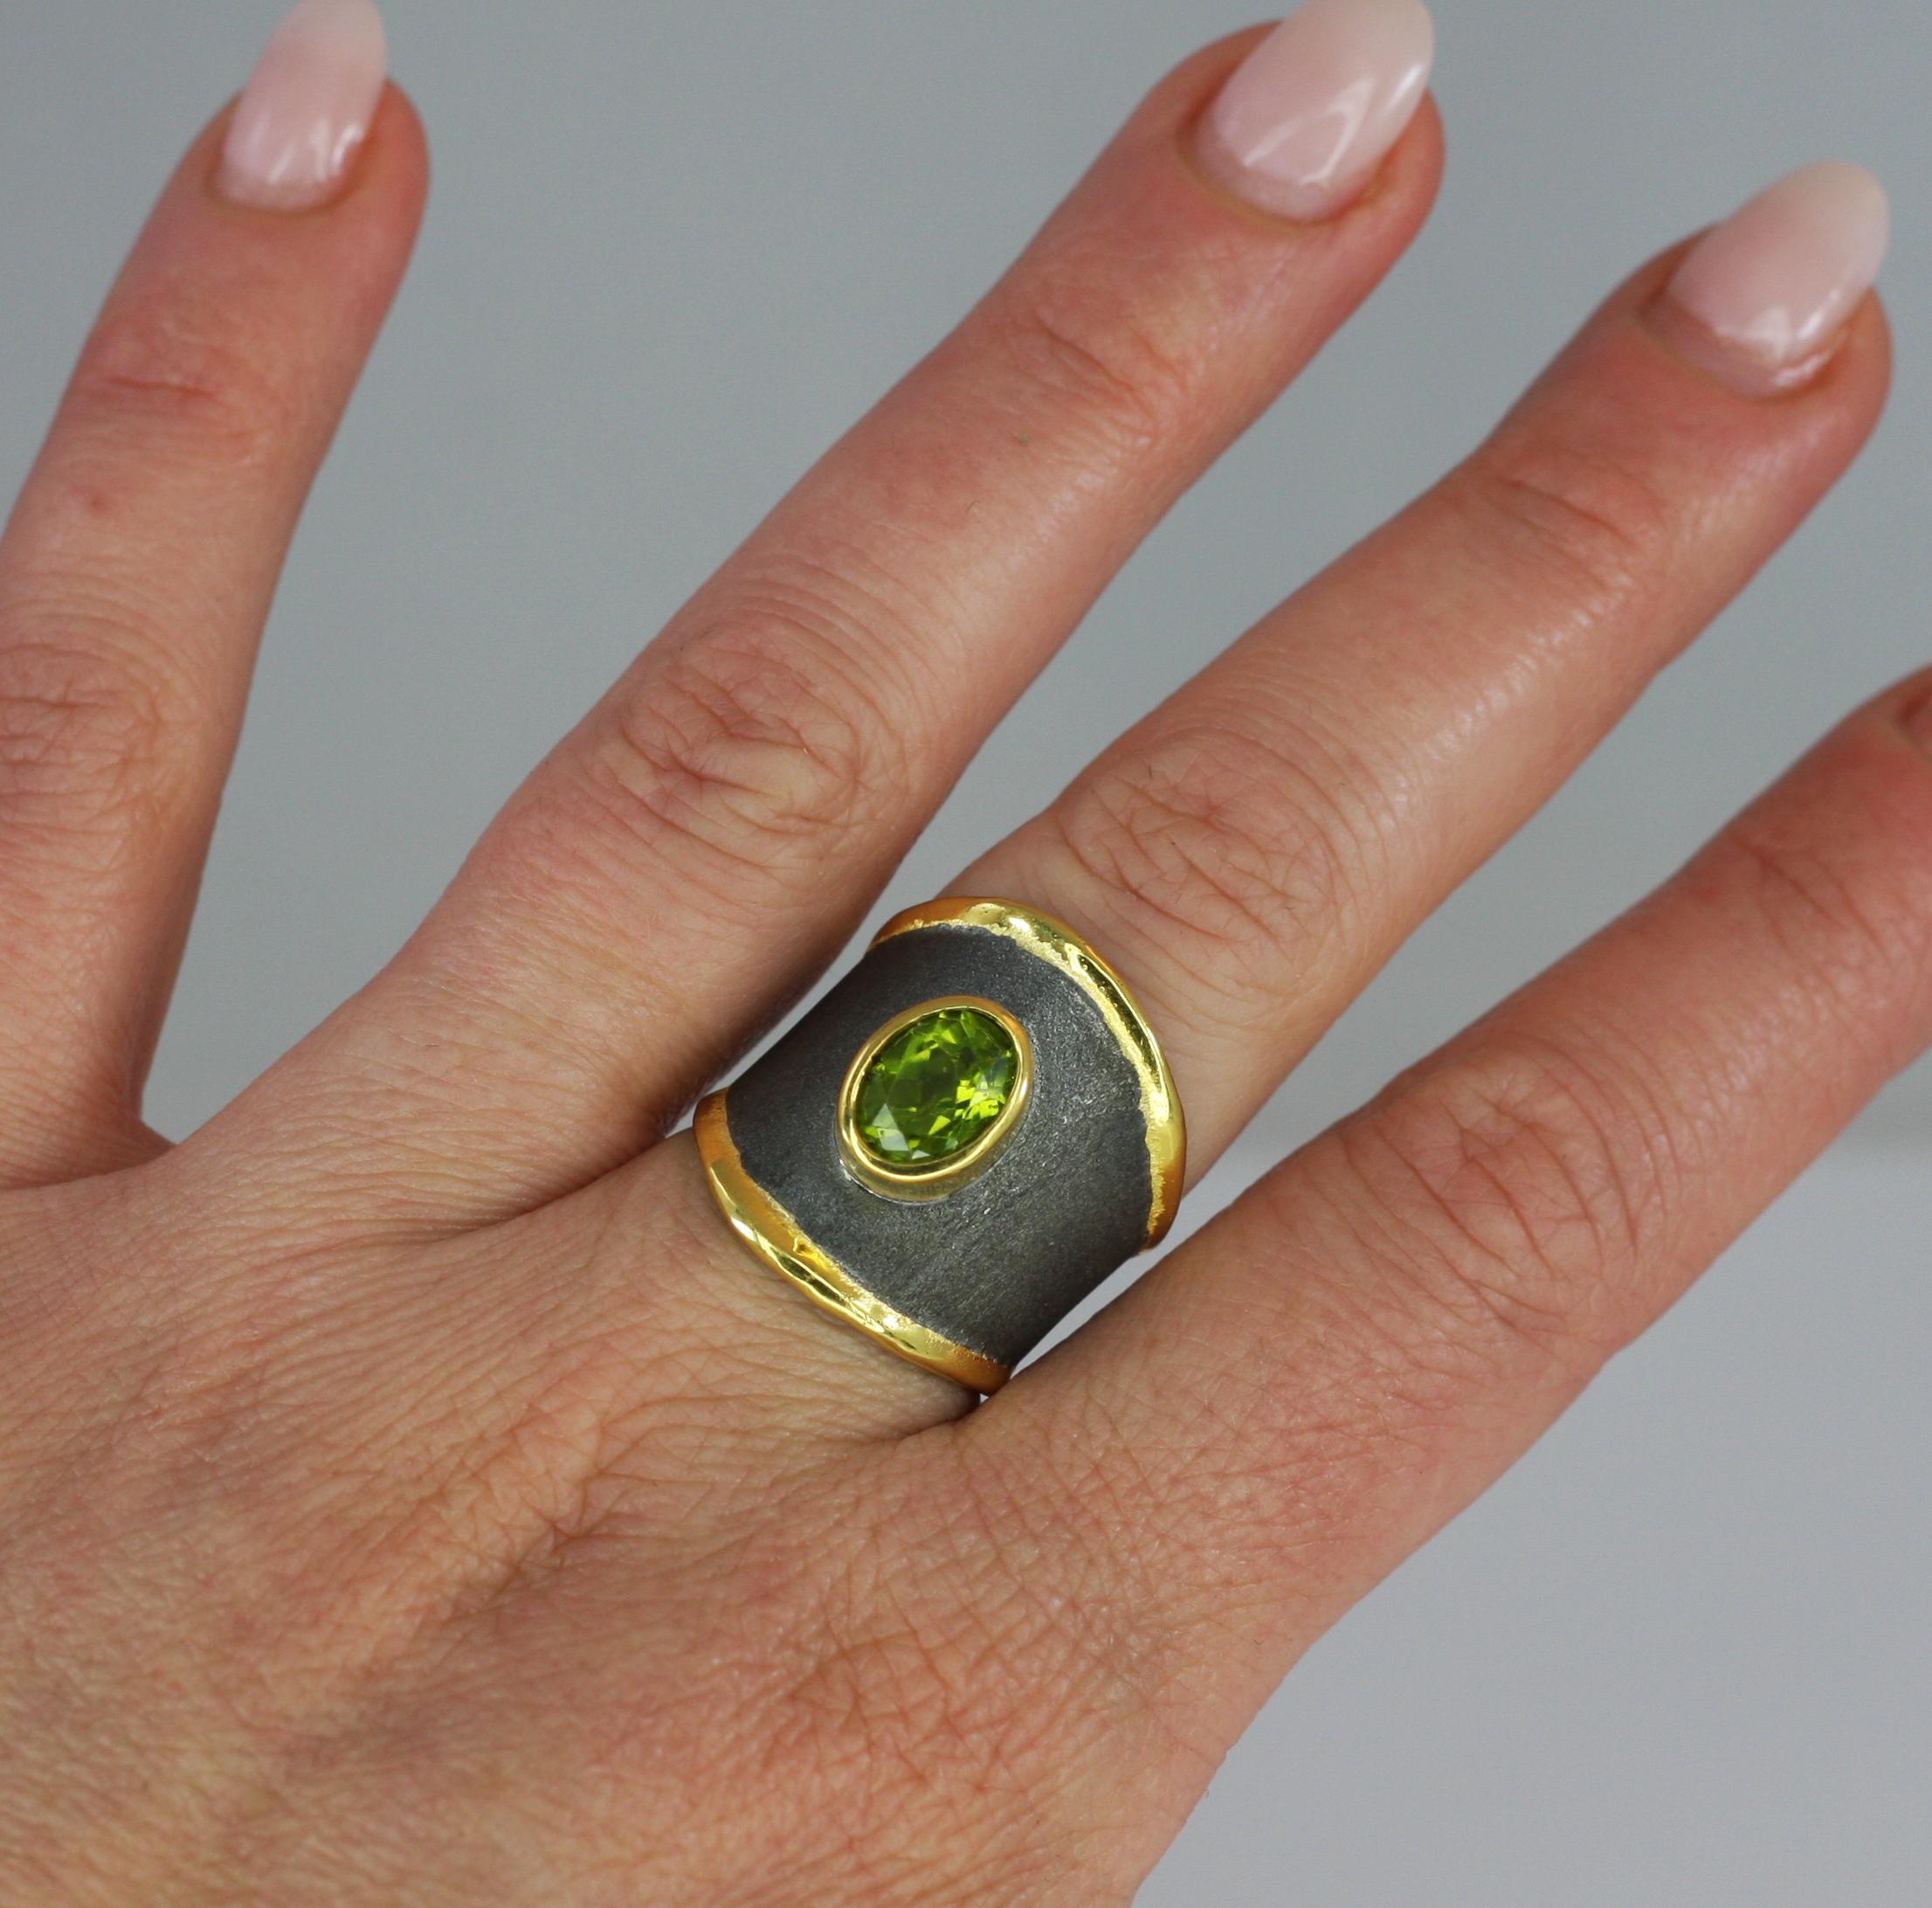 From Yianni Creations - Eclyps Collection this is 950 purity fine silver ring handmade in Greece. The ring is plated with Black Rhodium and decorated with 24 karat gold. The unique look is completed by 2.00 Carat oval cut Peridot. Contact us for